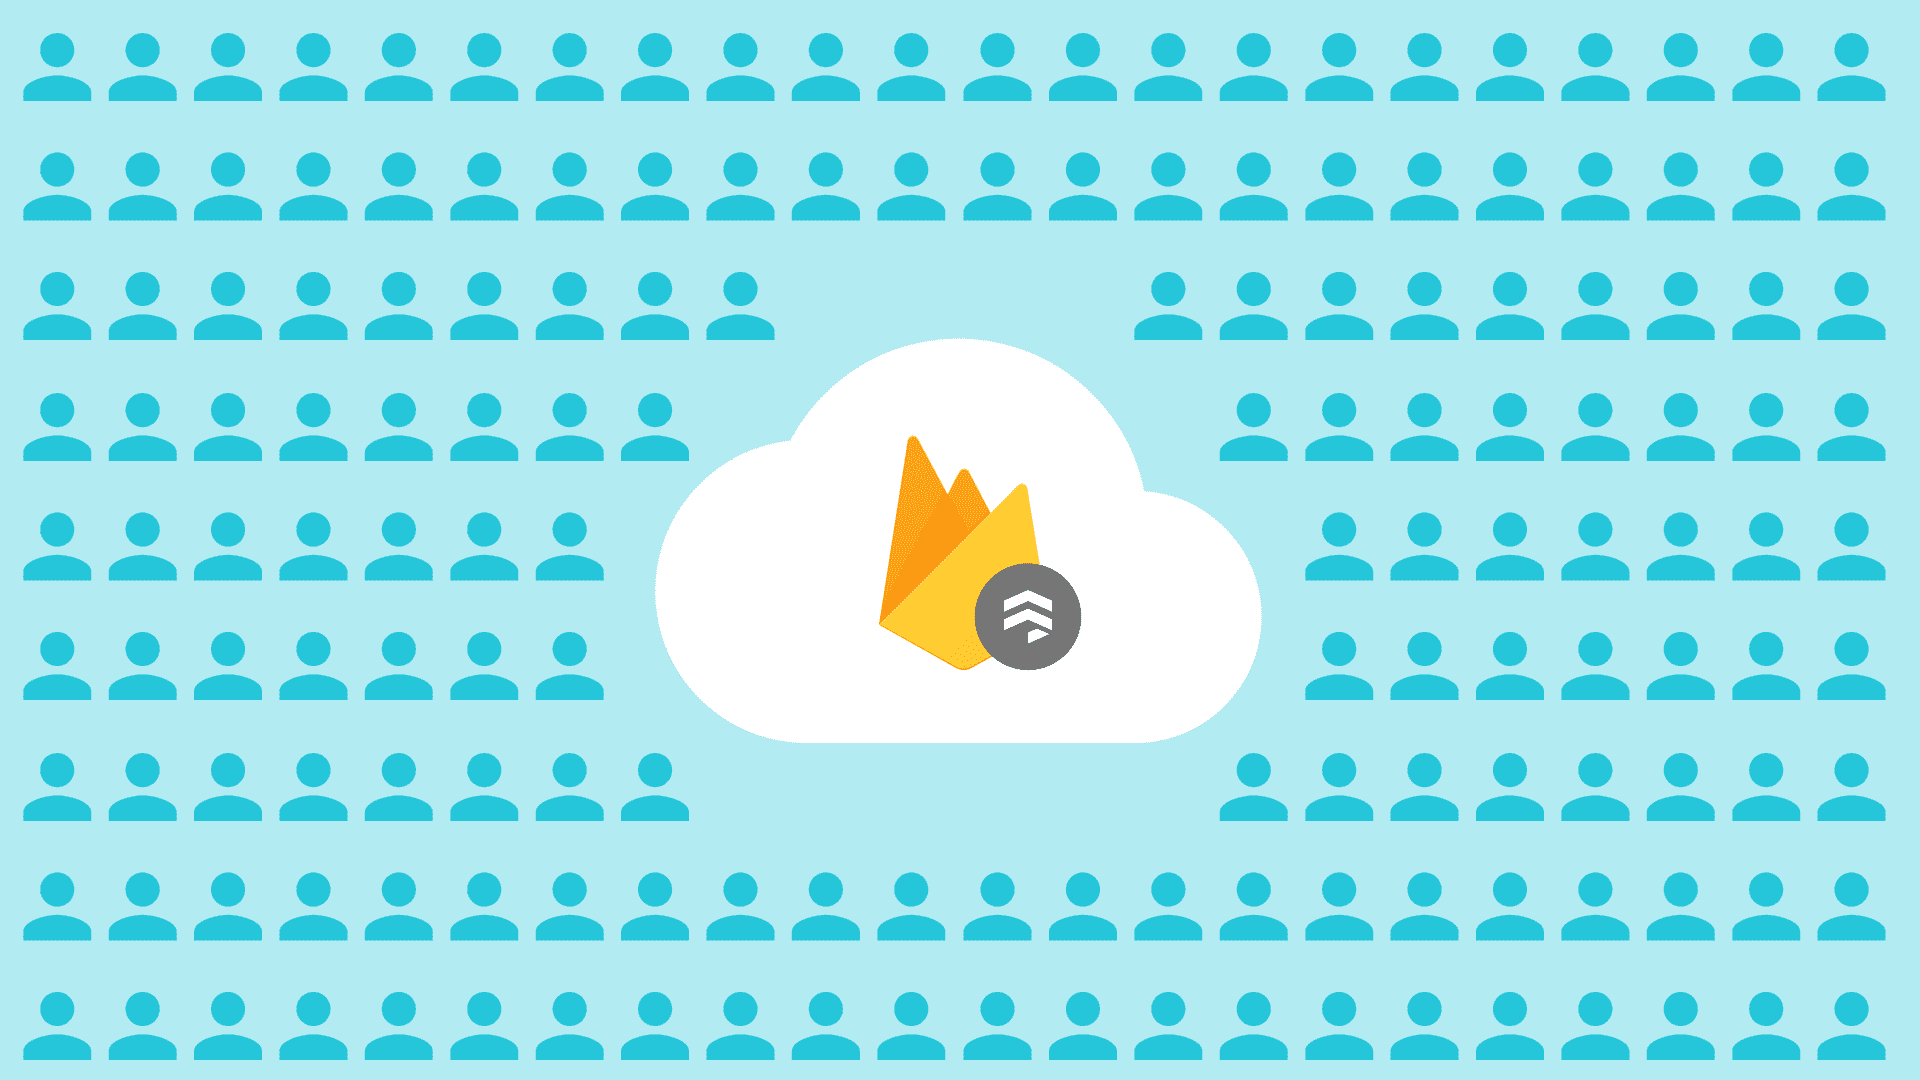 Illustration of firebase firestore logo and audience members